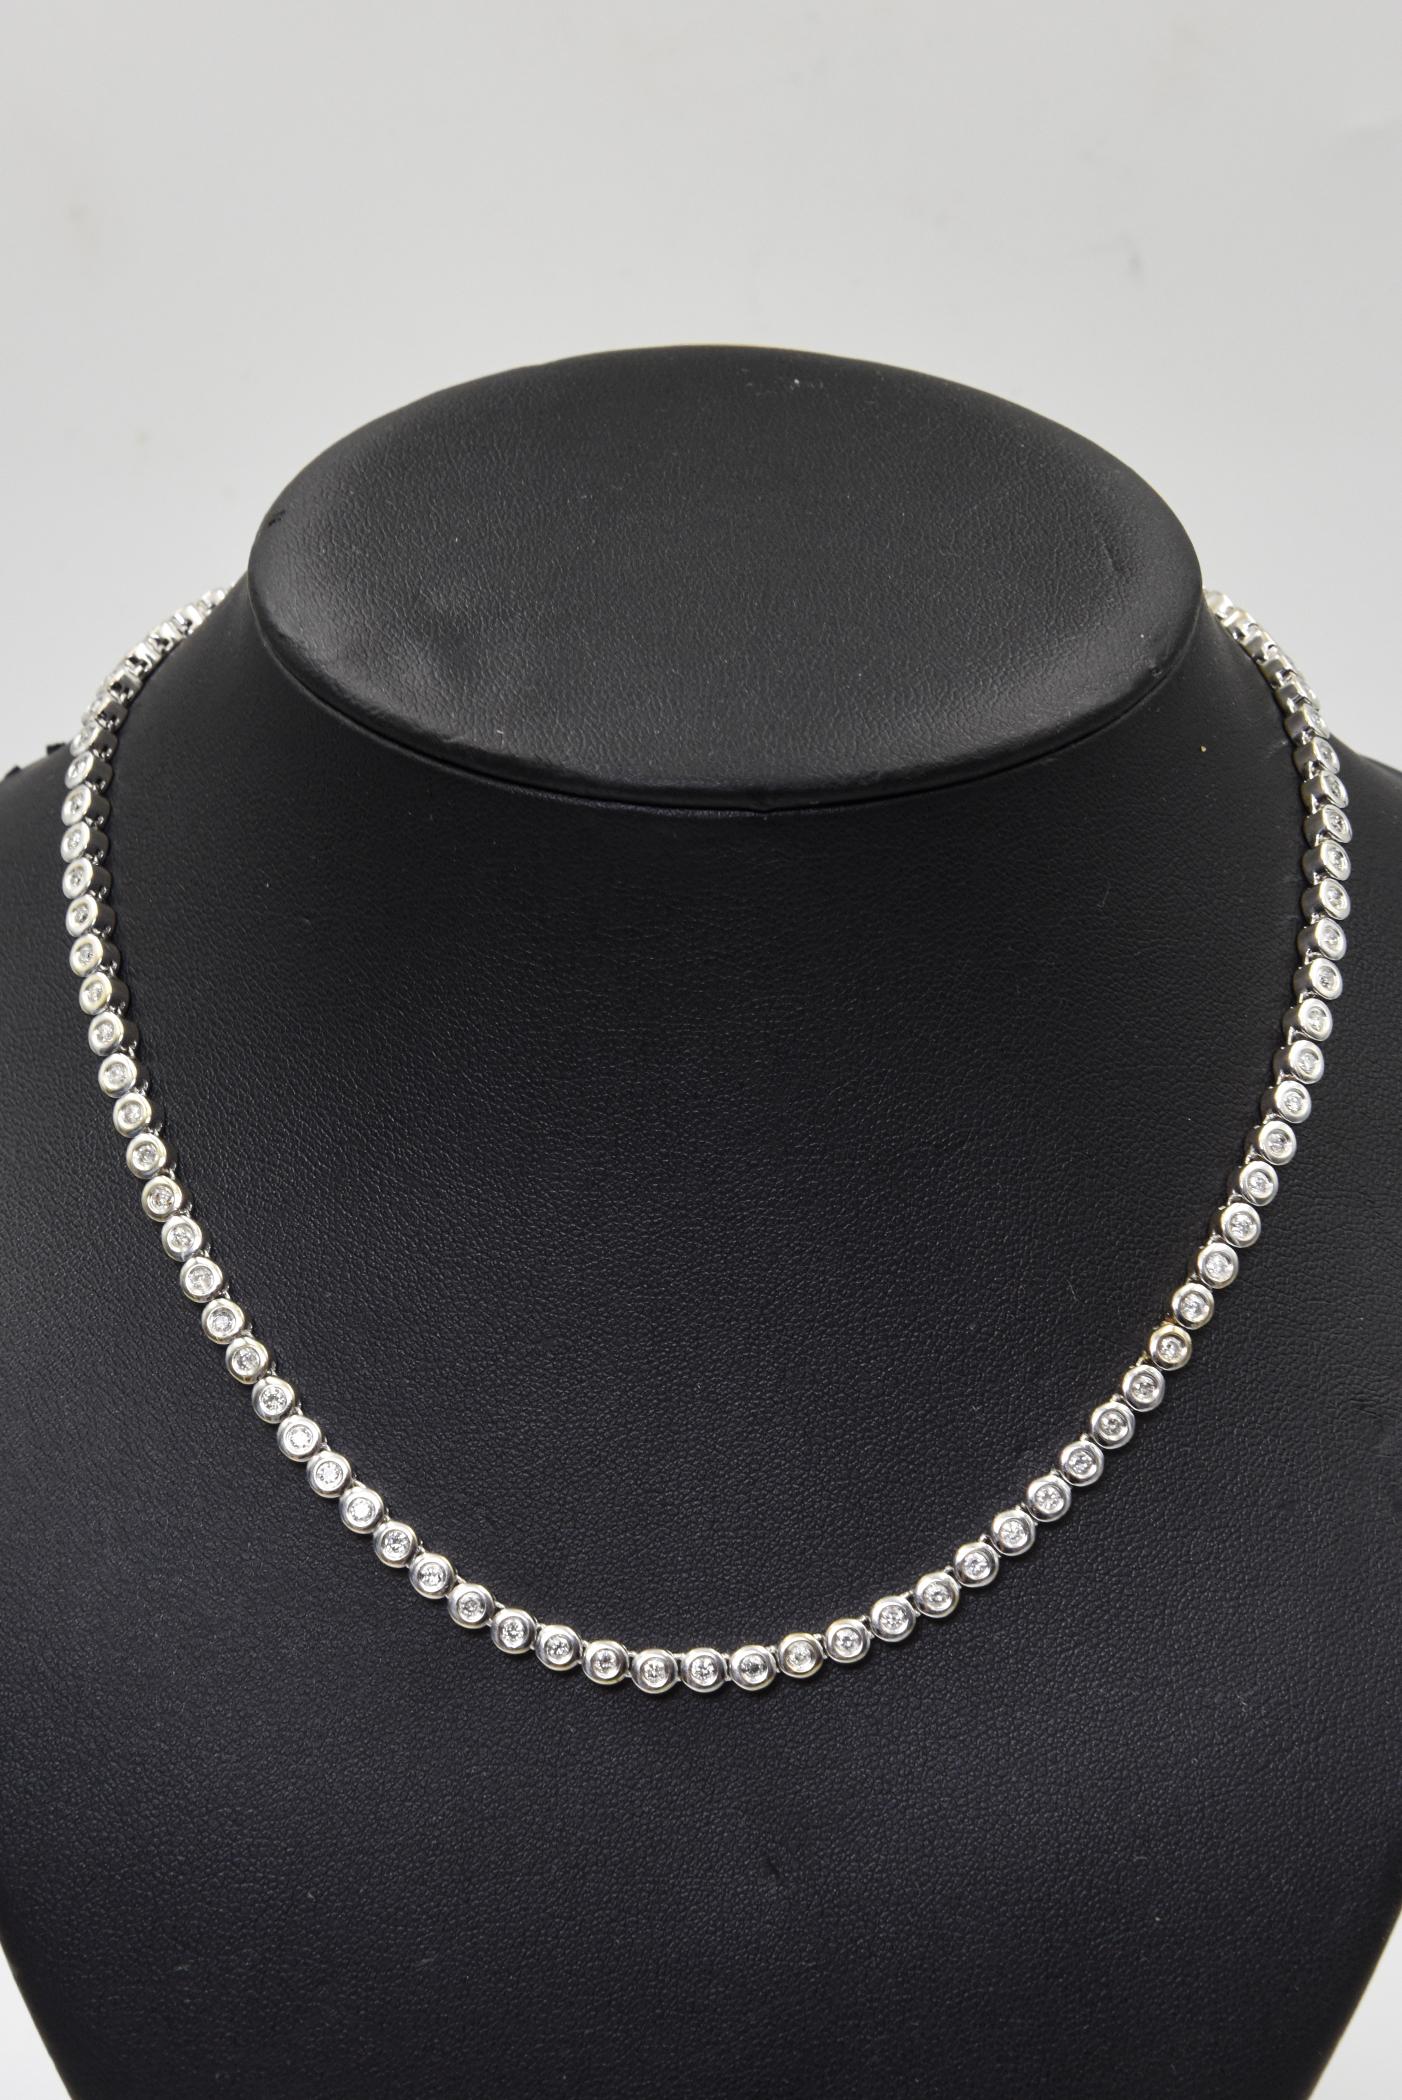 This necklace features 93 bezel set diamonds approximately .06 points each total diamond weight approximately 5.58. mounted in 14k white gold.  The approximate total diamond weight for the necklace is .  It has a push button clasp and a figure 